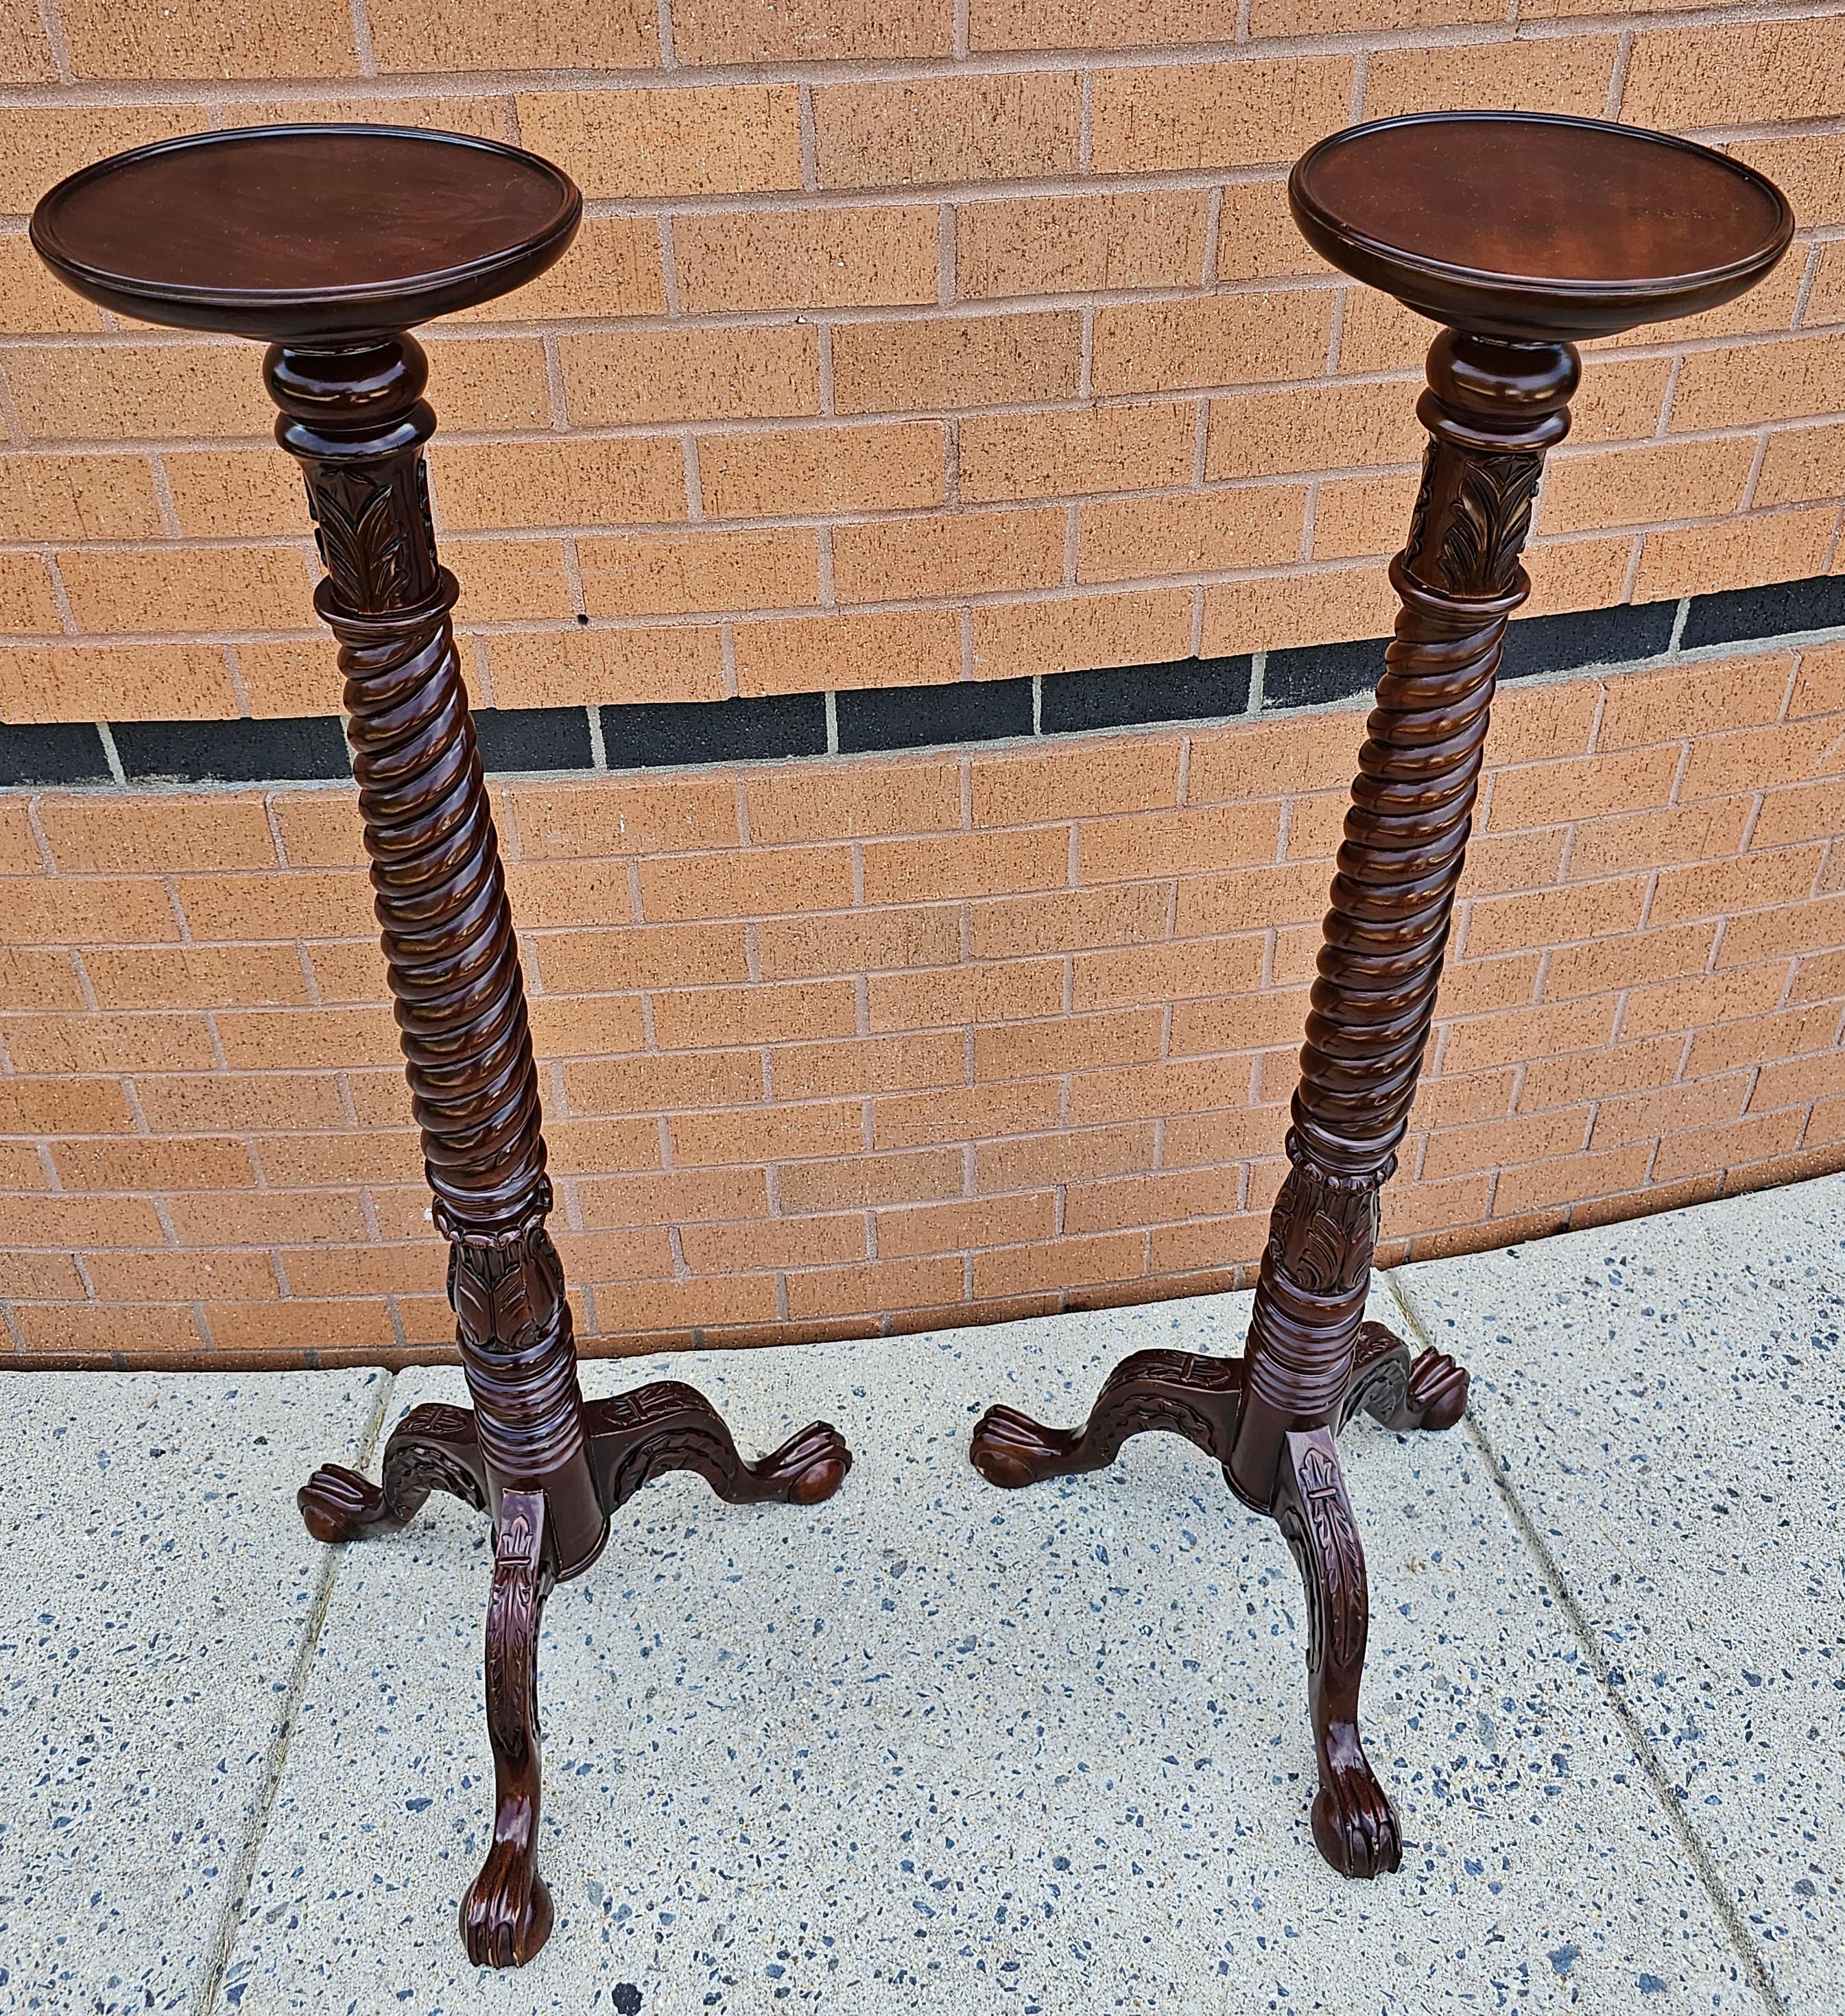 An exquisite Pair of Chippendale Style Carved and Stained Mahogany Stands with Ball Claw Feet in great condition. Measures at the base 20